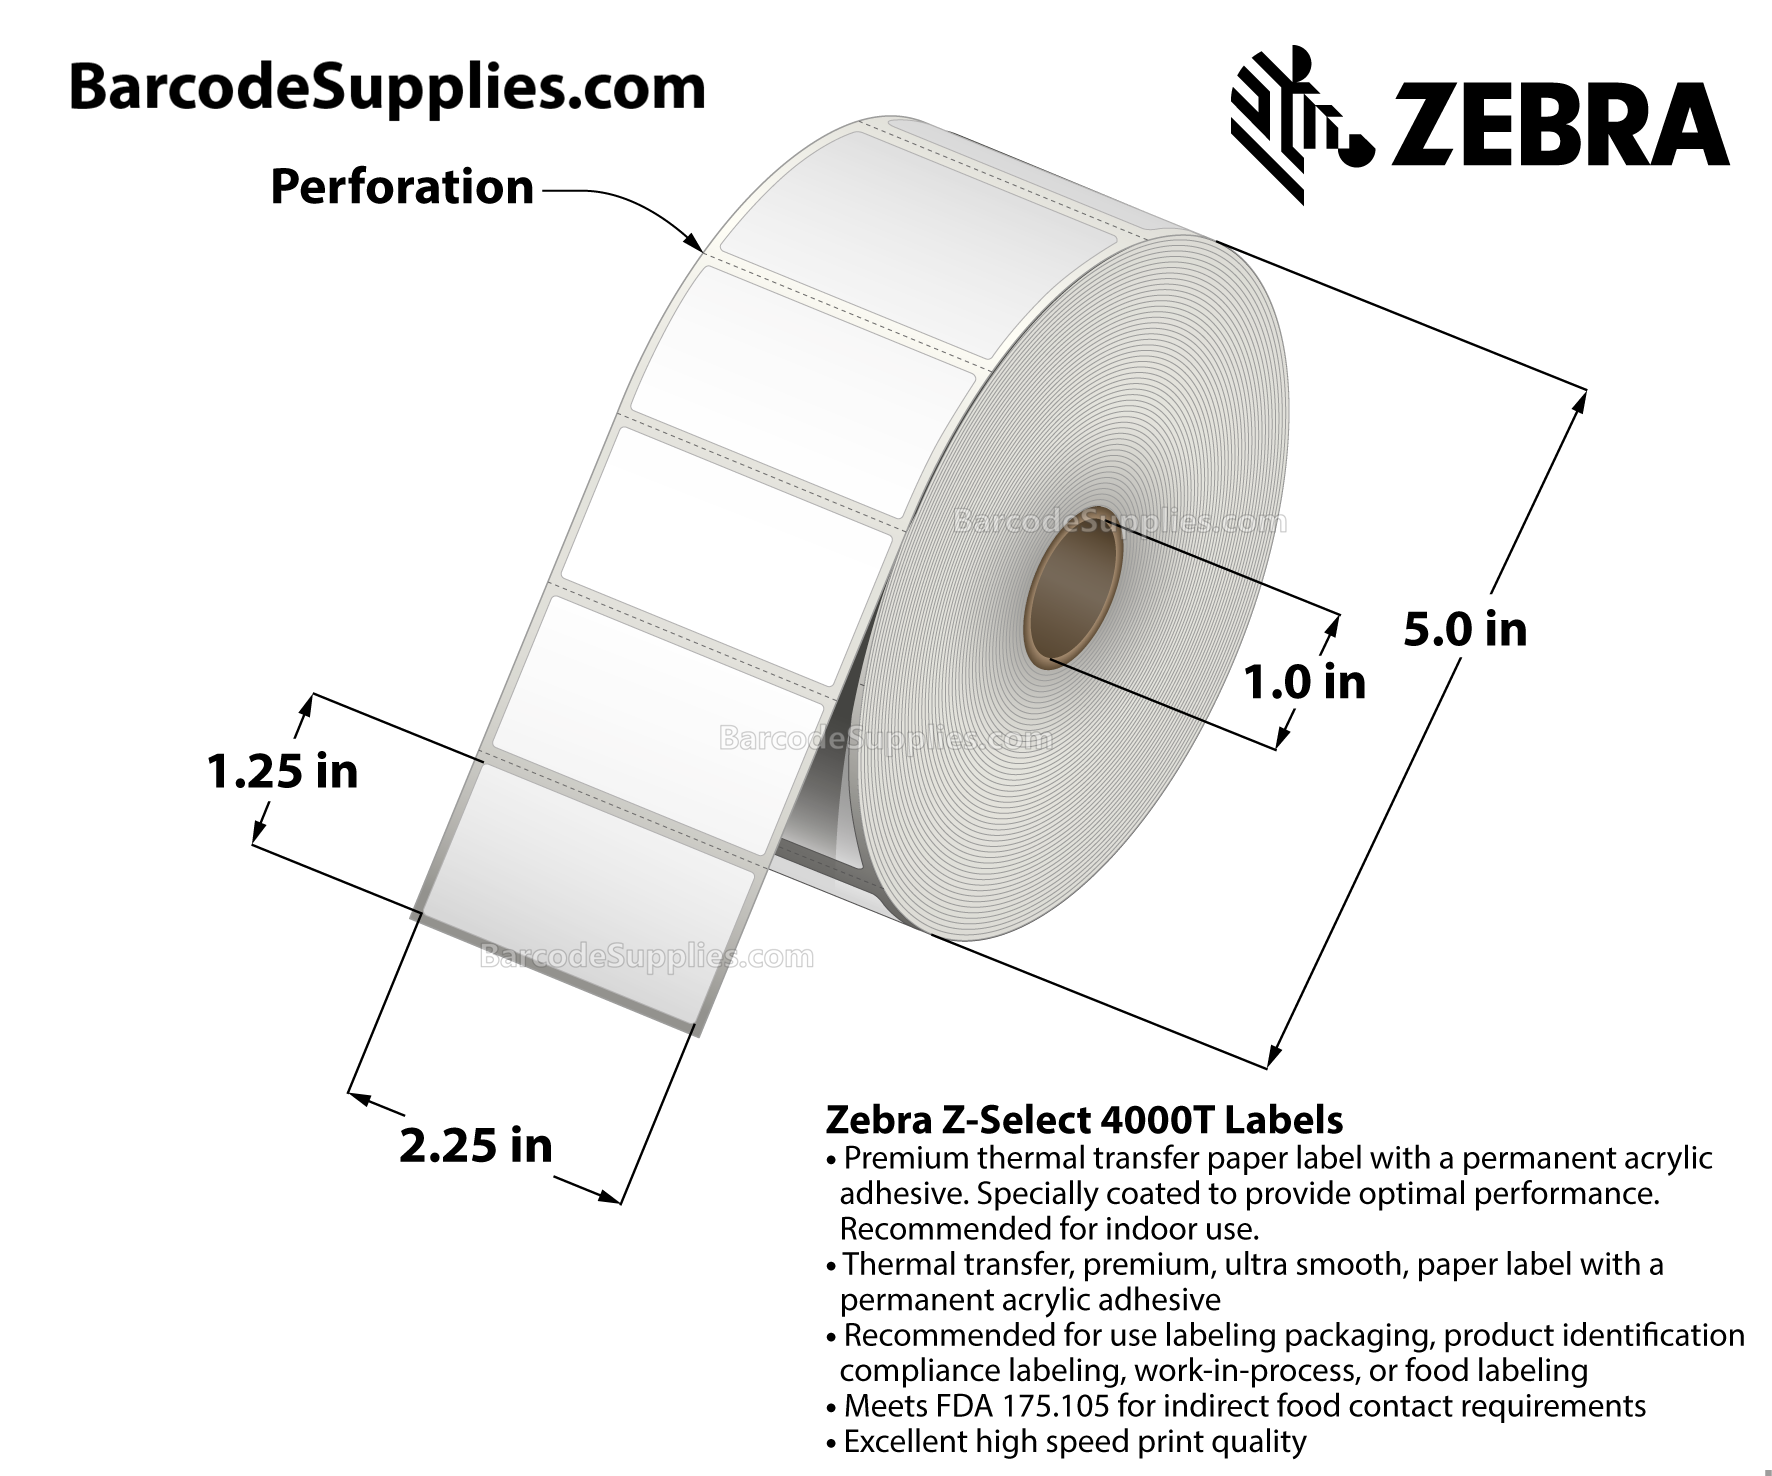 2.25 x 1.25 Thermal Transfer White Z-Select 4000T Labels With Permanent Adhesive - Perforated - 2100 Labels Per Roll - Carton Of 12 Rolls - 25200 Labels Total - MPN: 800272-125